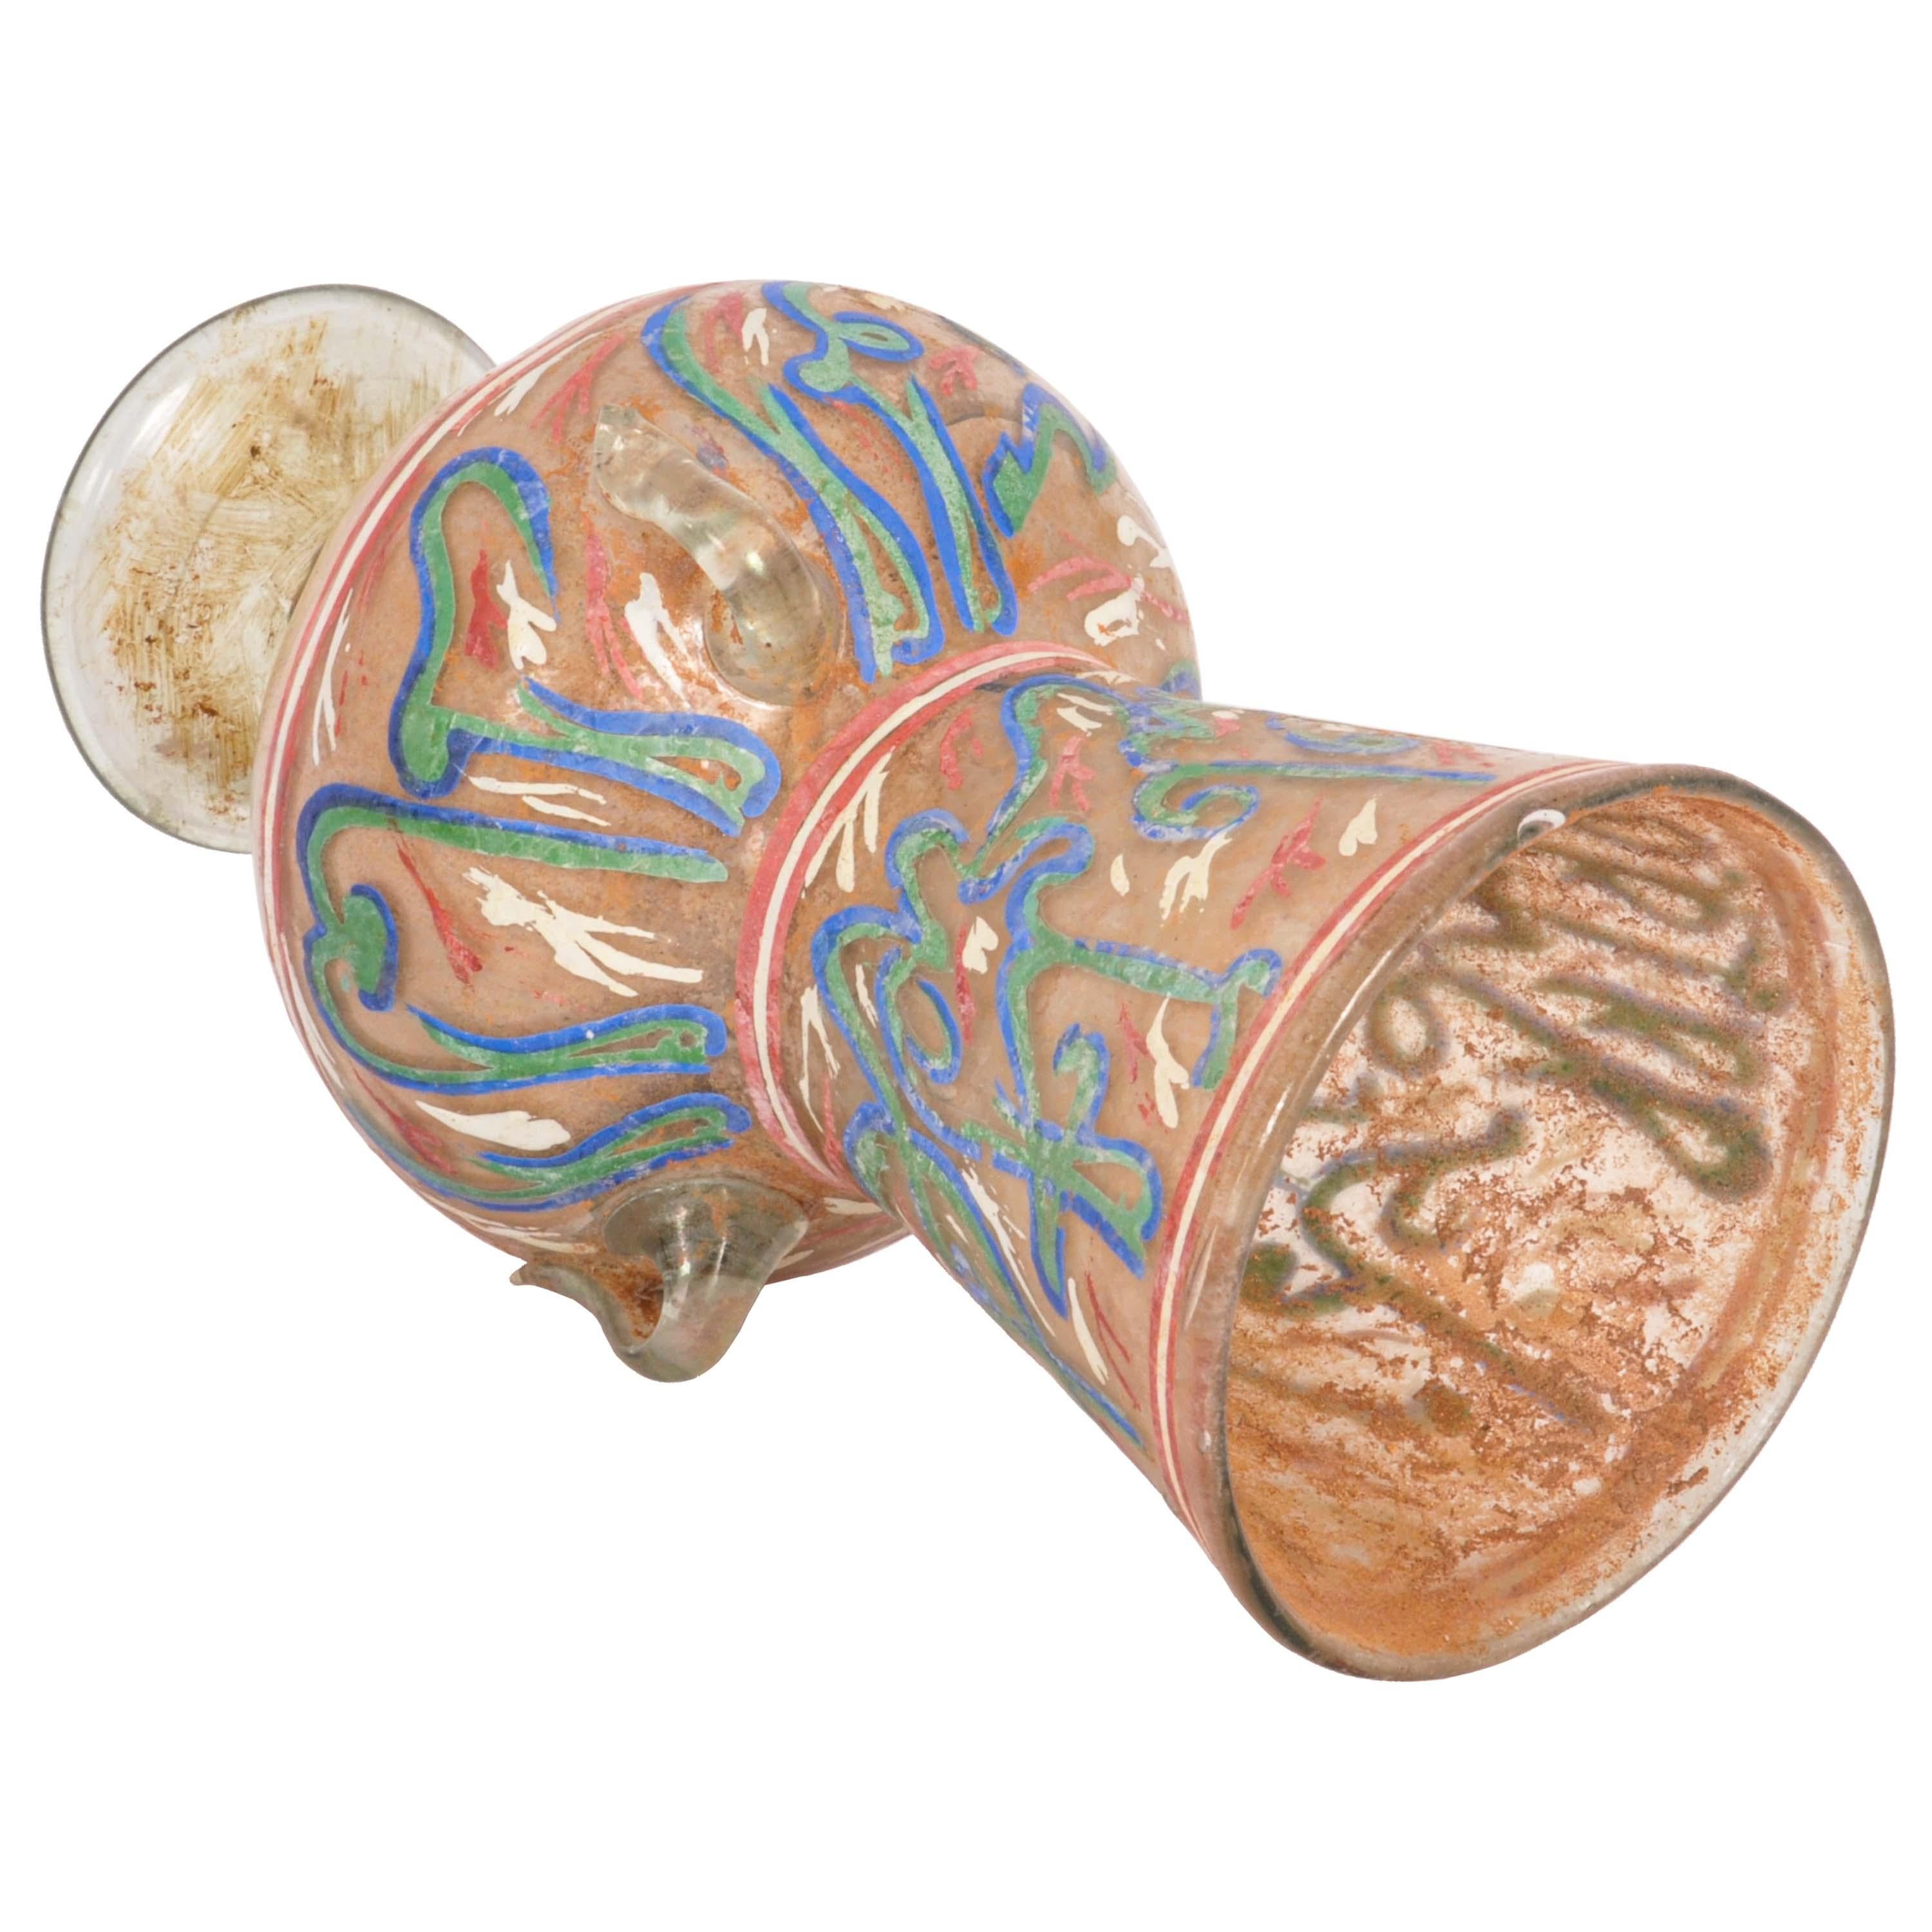 A rare and ancient Mamluk period Islamic handblown glass mosque lamp, Egypt or Syria, early 1500's.
The lamp of diminutive form & having a flared neck with Islamic calligraphy, the globular body also decorated with quranic script in blue. There are